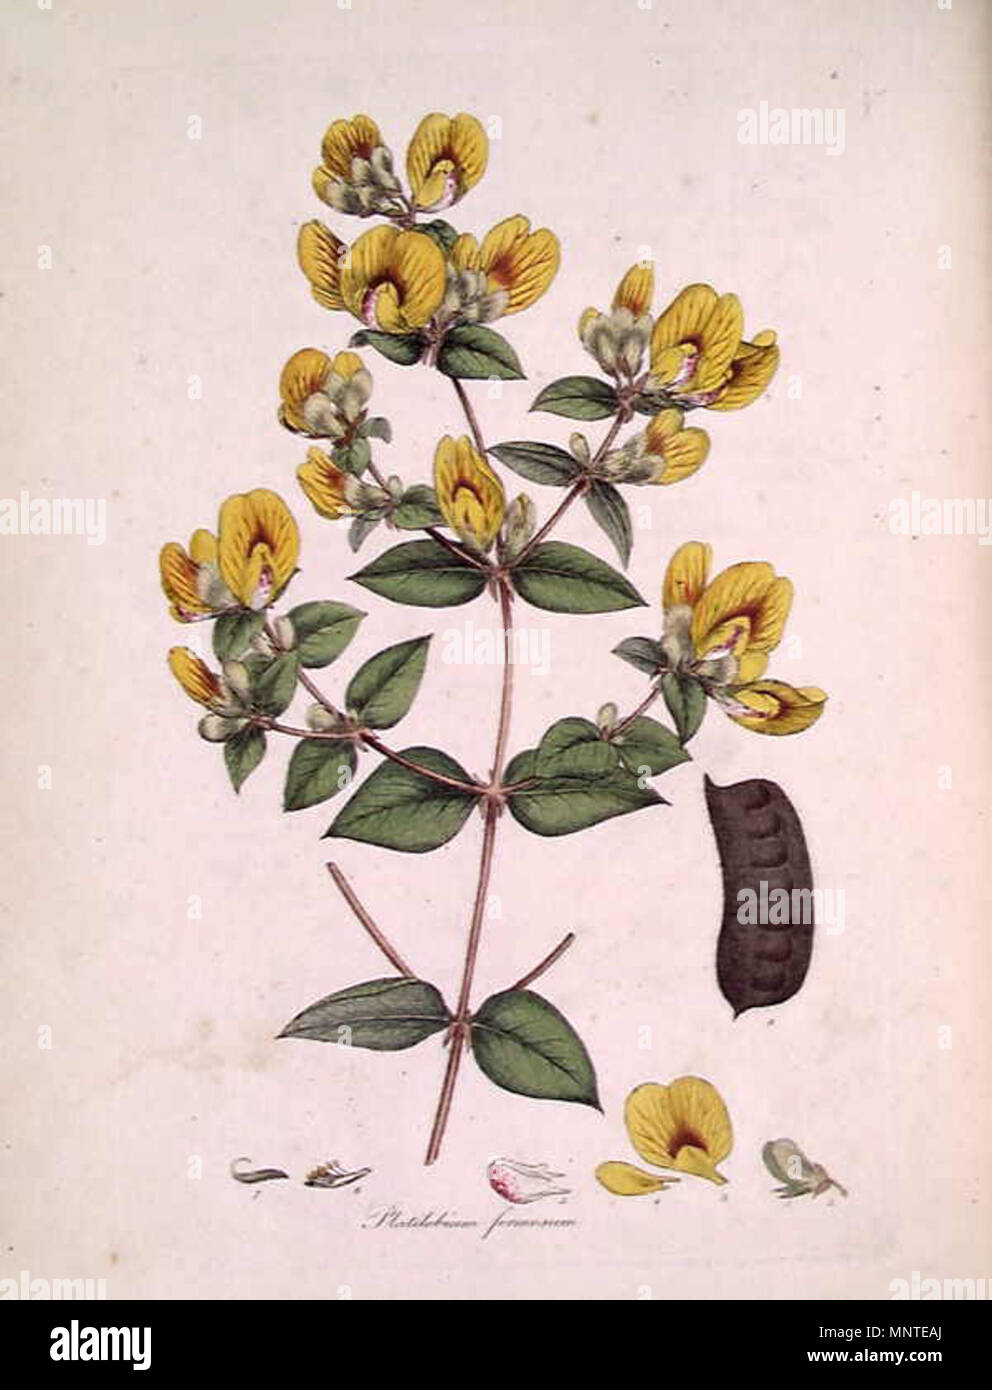 . This is an image of a print of a hand coloured engraving by James Sowerby (1757-1822), based on drawing nominally by John White but probably by the convict artist Thomas Watling. It appeared as Tab. IV in James Edward Smith's 1793 A Specimen of the Botany of New Holland. The plant depicted is Platylobium formosum (Common Name). The accompanying text explains the figure [will follow here]  . 1793. James Sowerby 1010 Platylobium formosum (Sowerby) Stock Photo